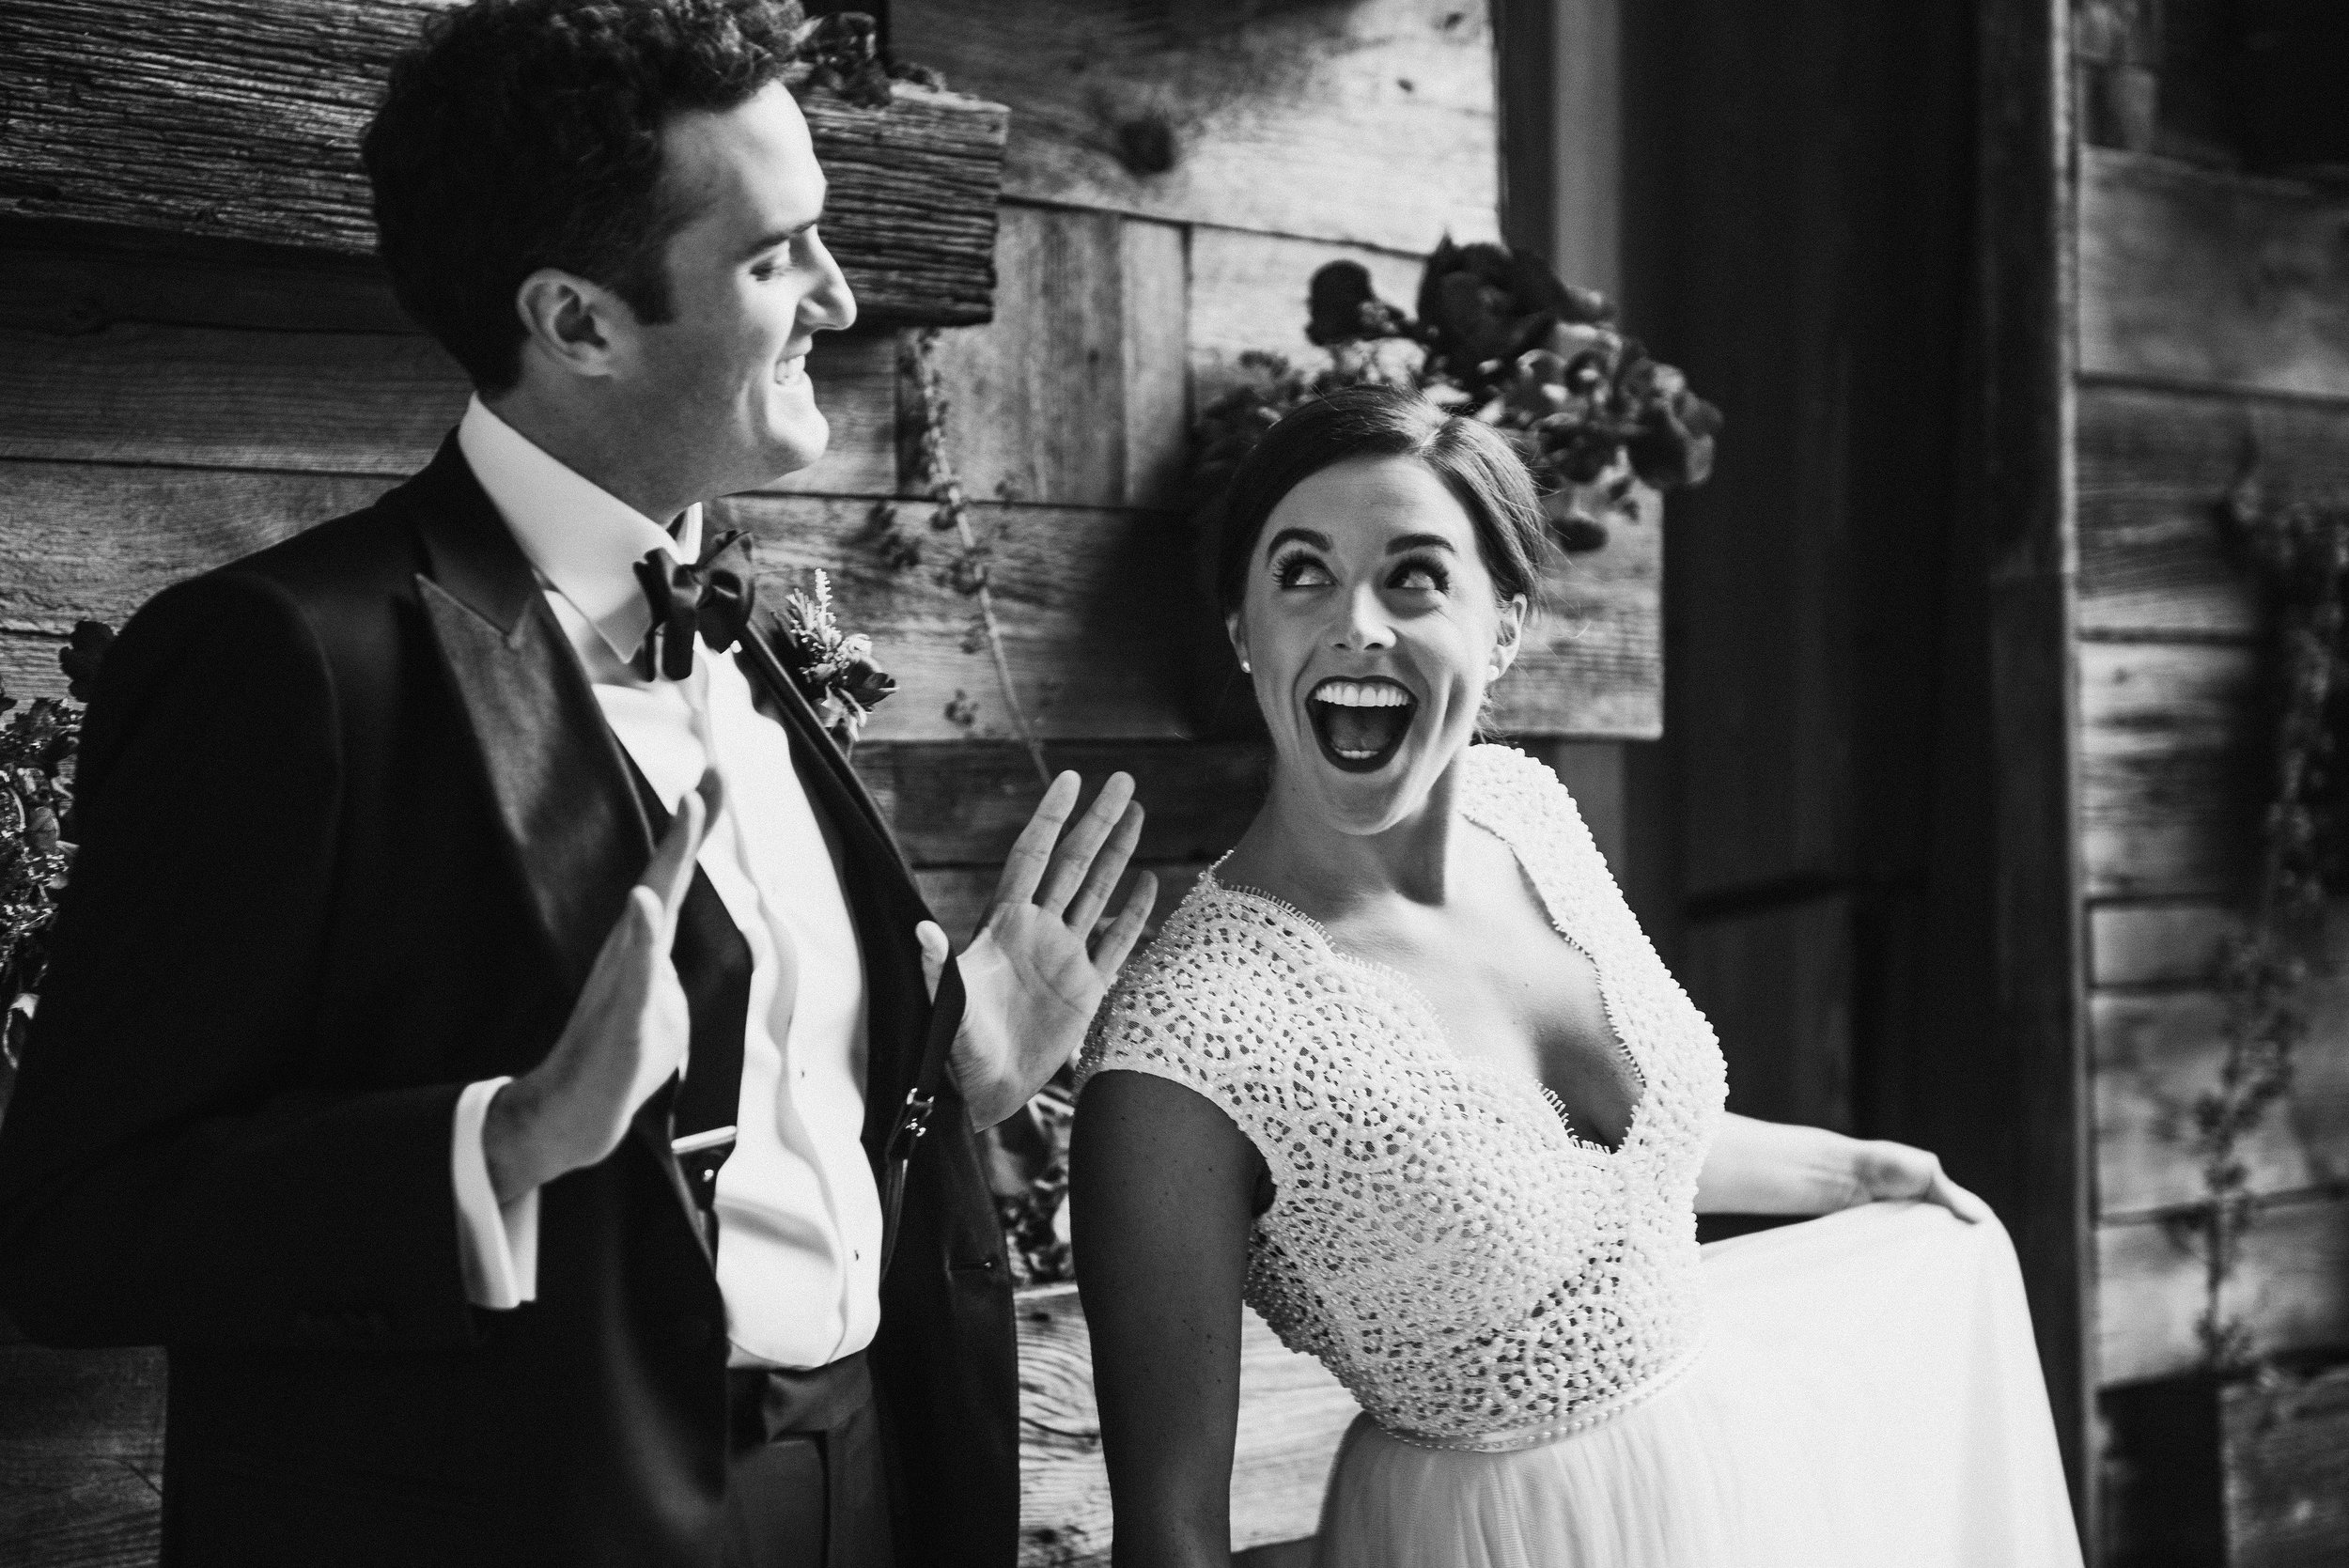 Two marriers stand against a wooden wall, one in a suit holding their suspenders out, the other in a wedding dress smiling big.